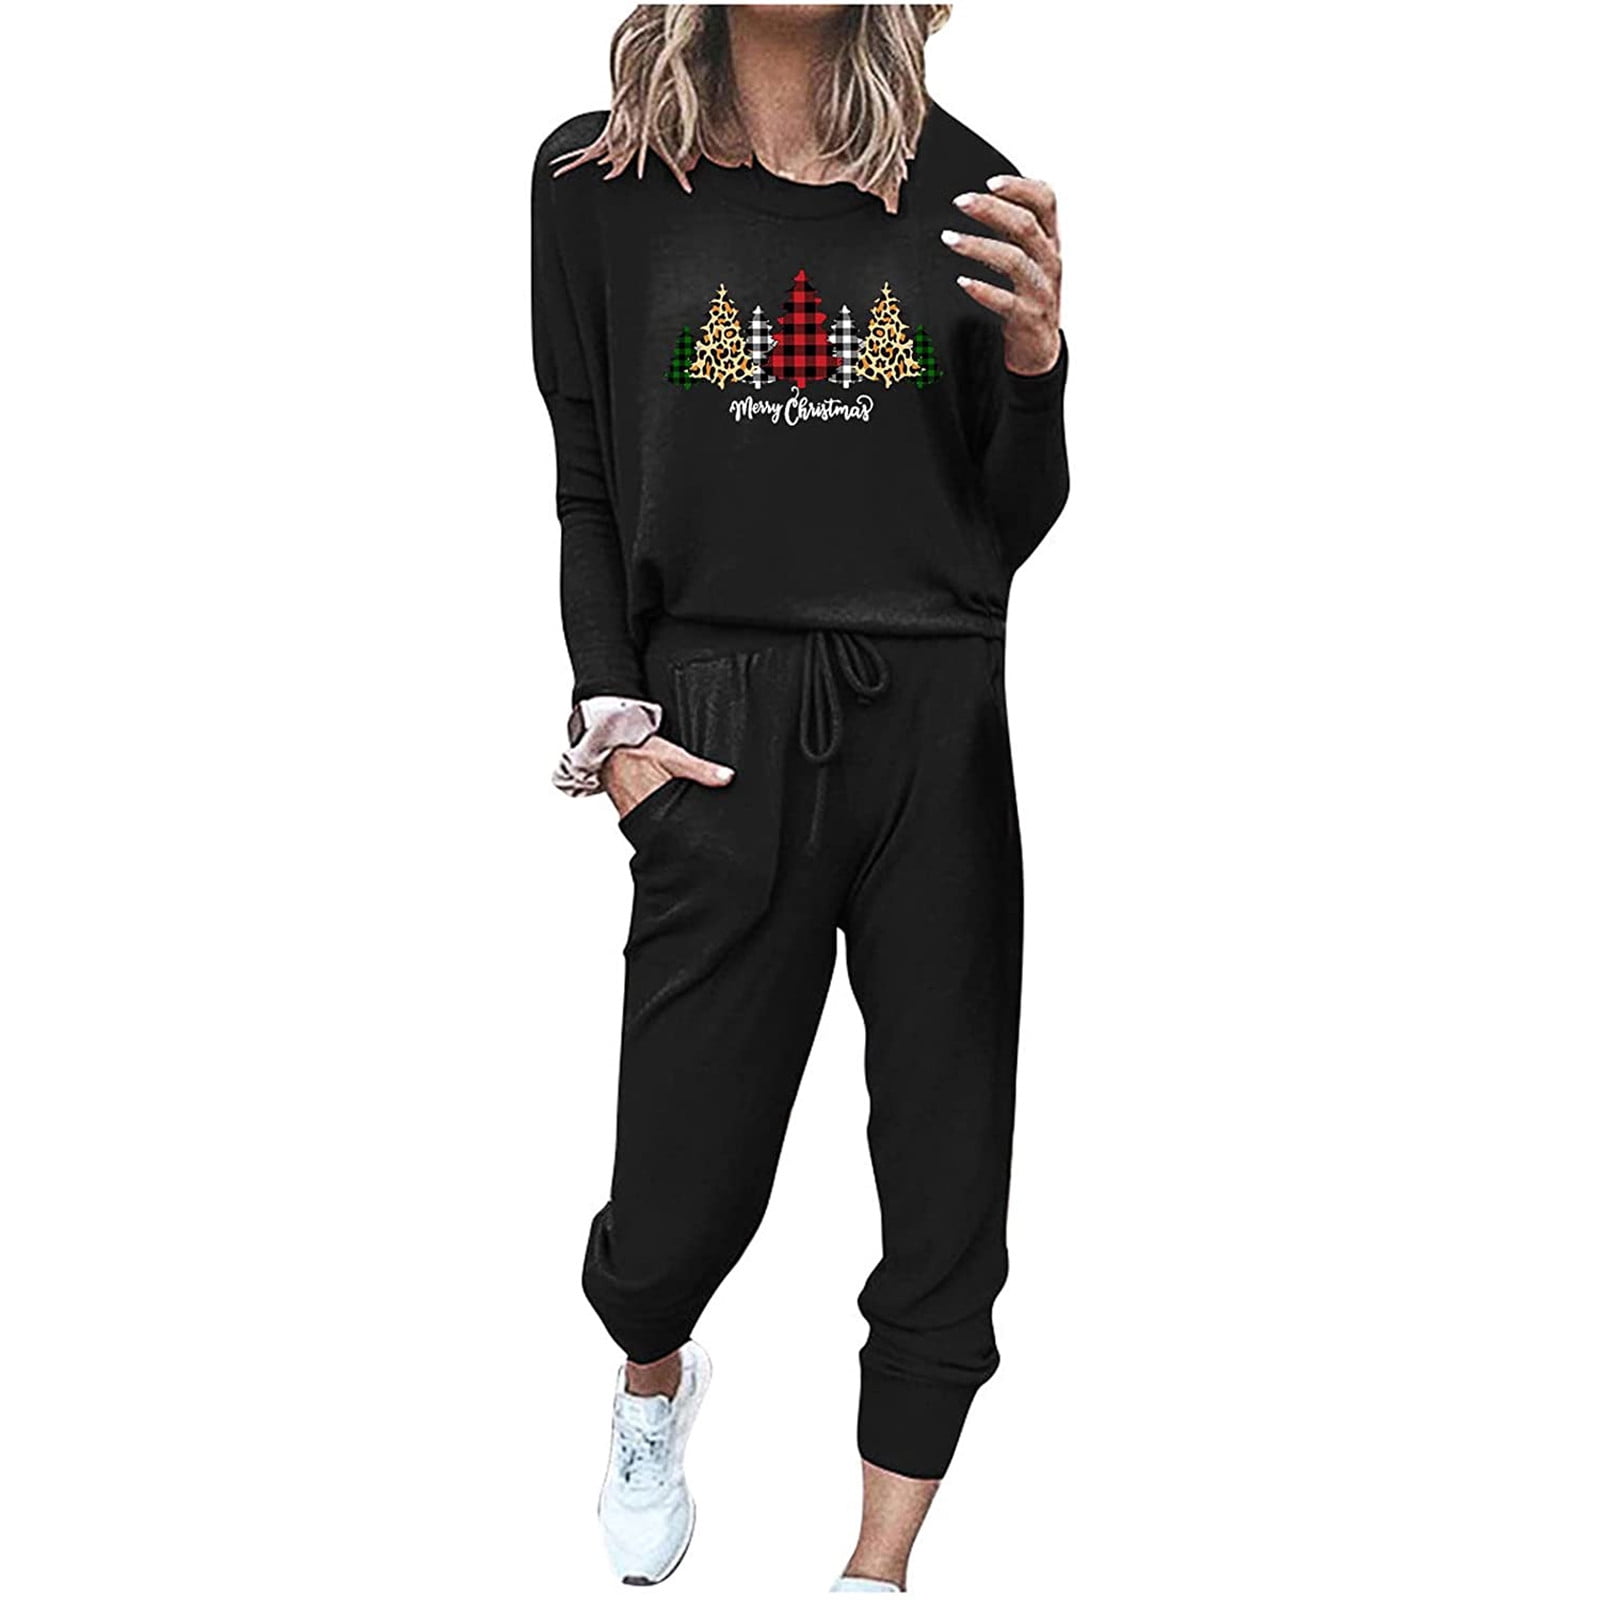 HAPIMO Savings Christmas Pajama Suit Sets for Women Two Piece Outfits Long  Sleeve Crewneck Pullover Tops and Long Pants Tracksuit Sweatsuits Black L 